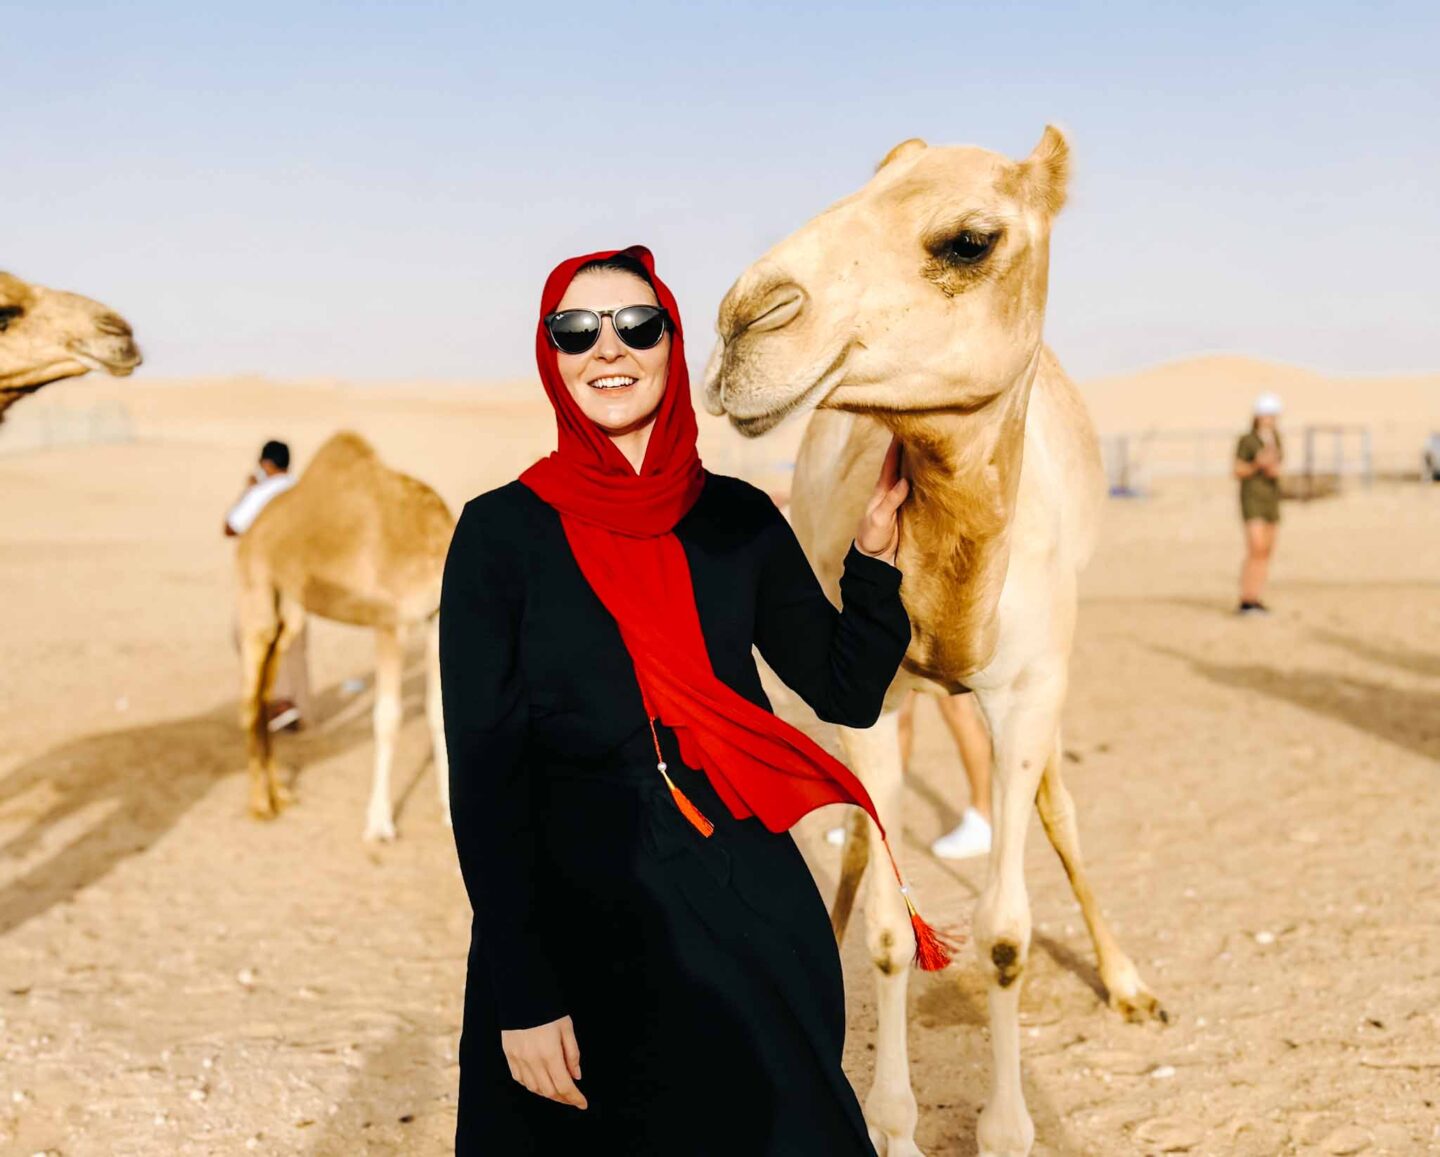 best excursions from Dubai, Ellie with camel in Dubai desert